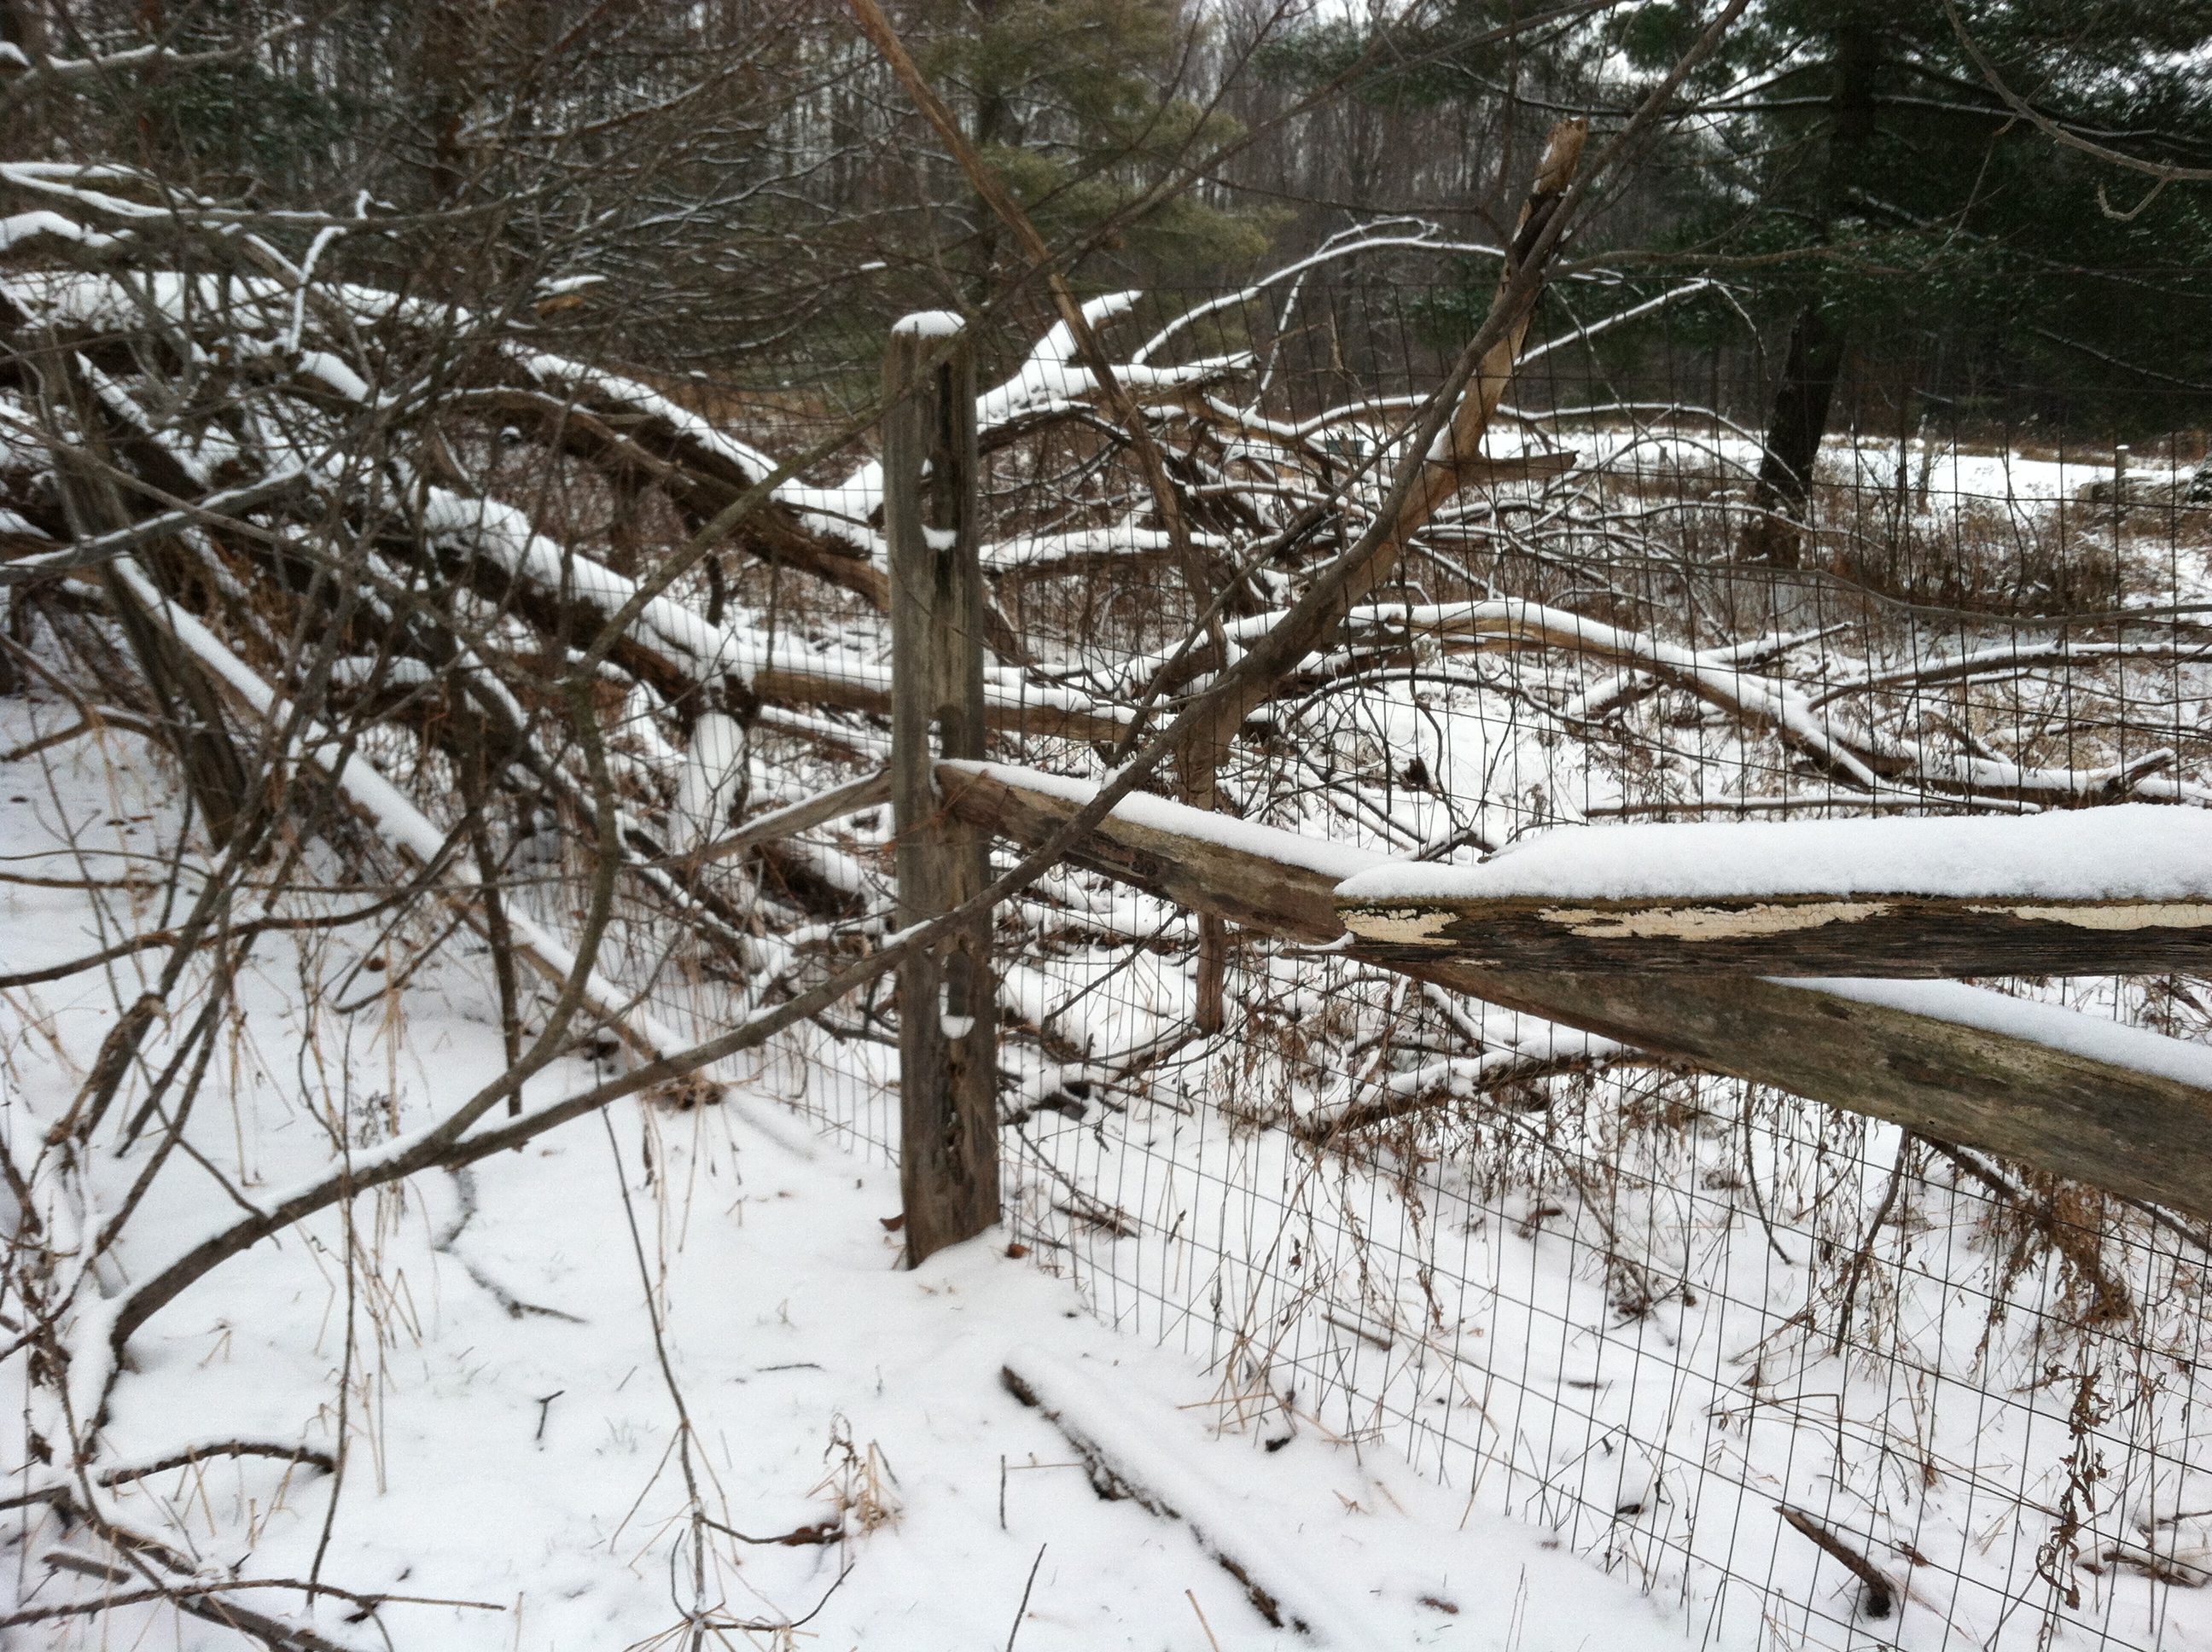 Fallen Branches and fence in Winter